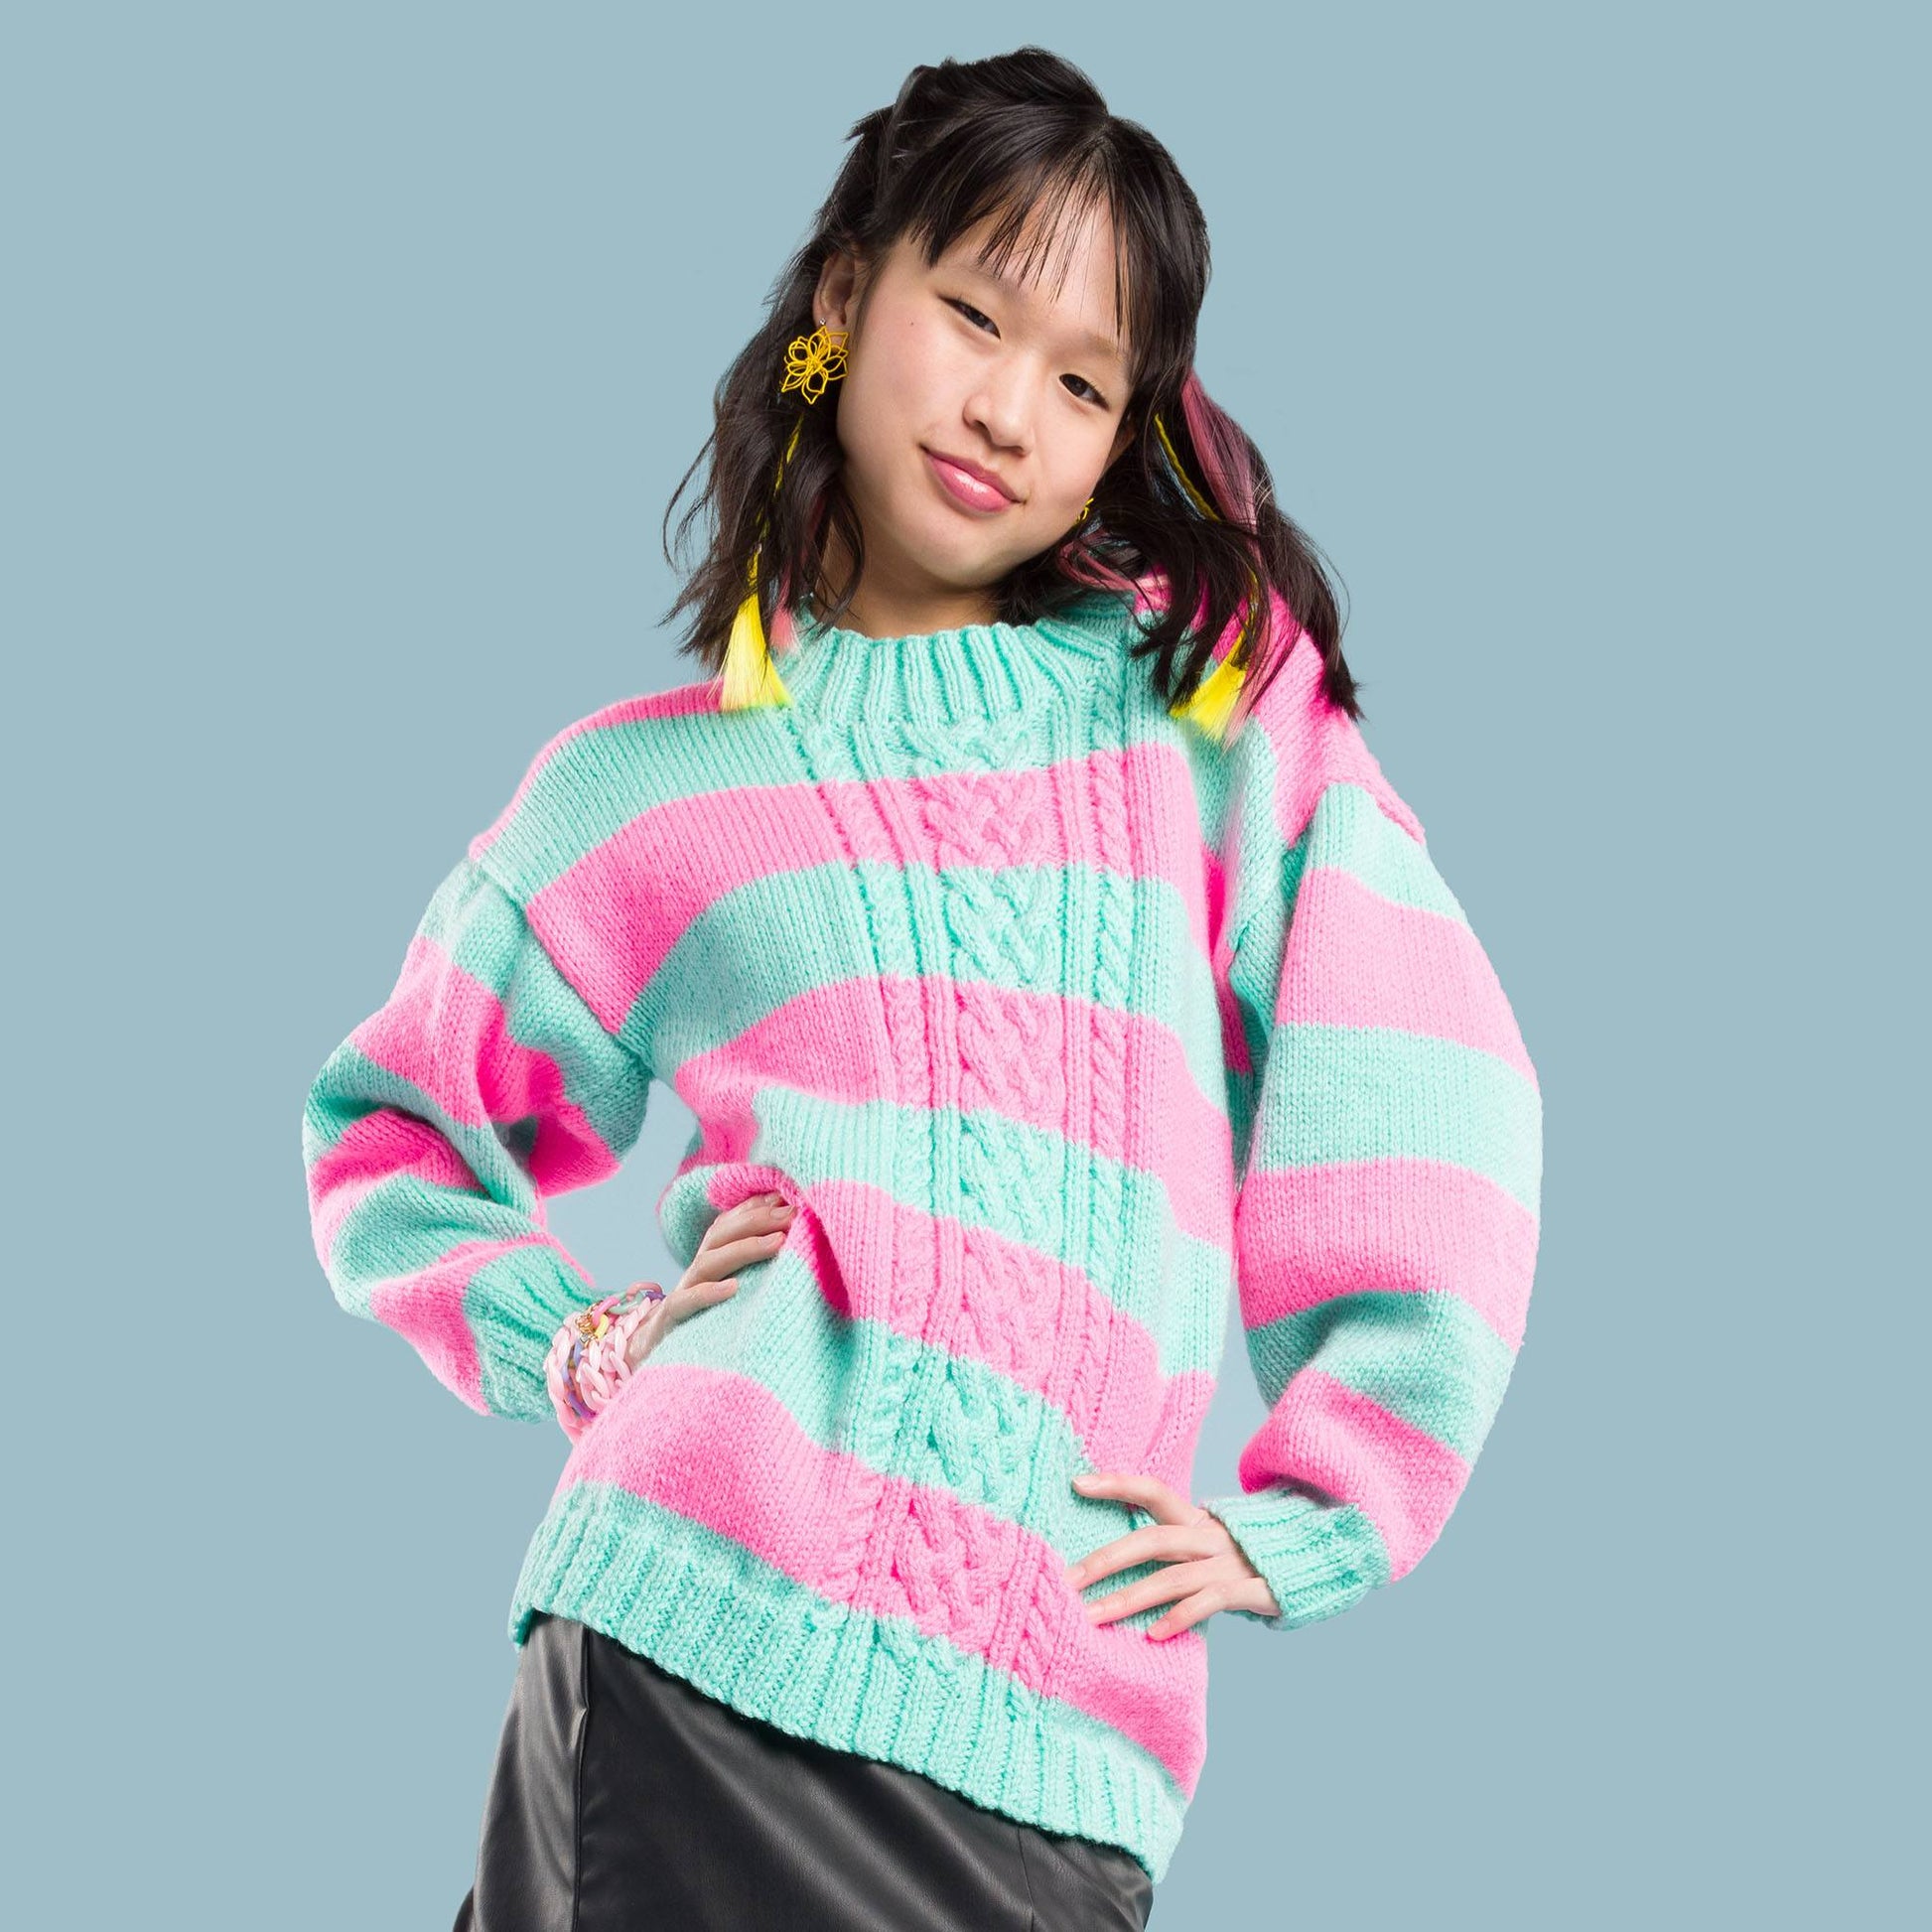 Free Red Heart Knit Visual Cable Front Pullover Pattern